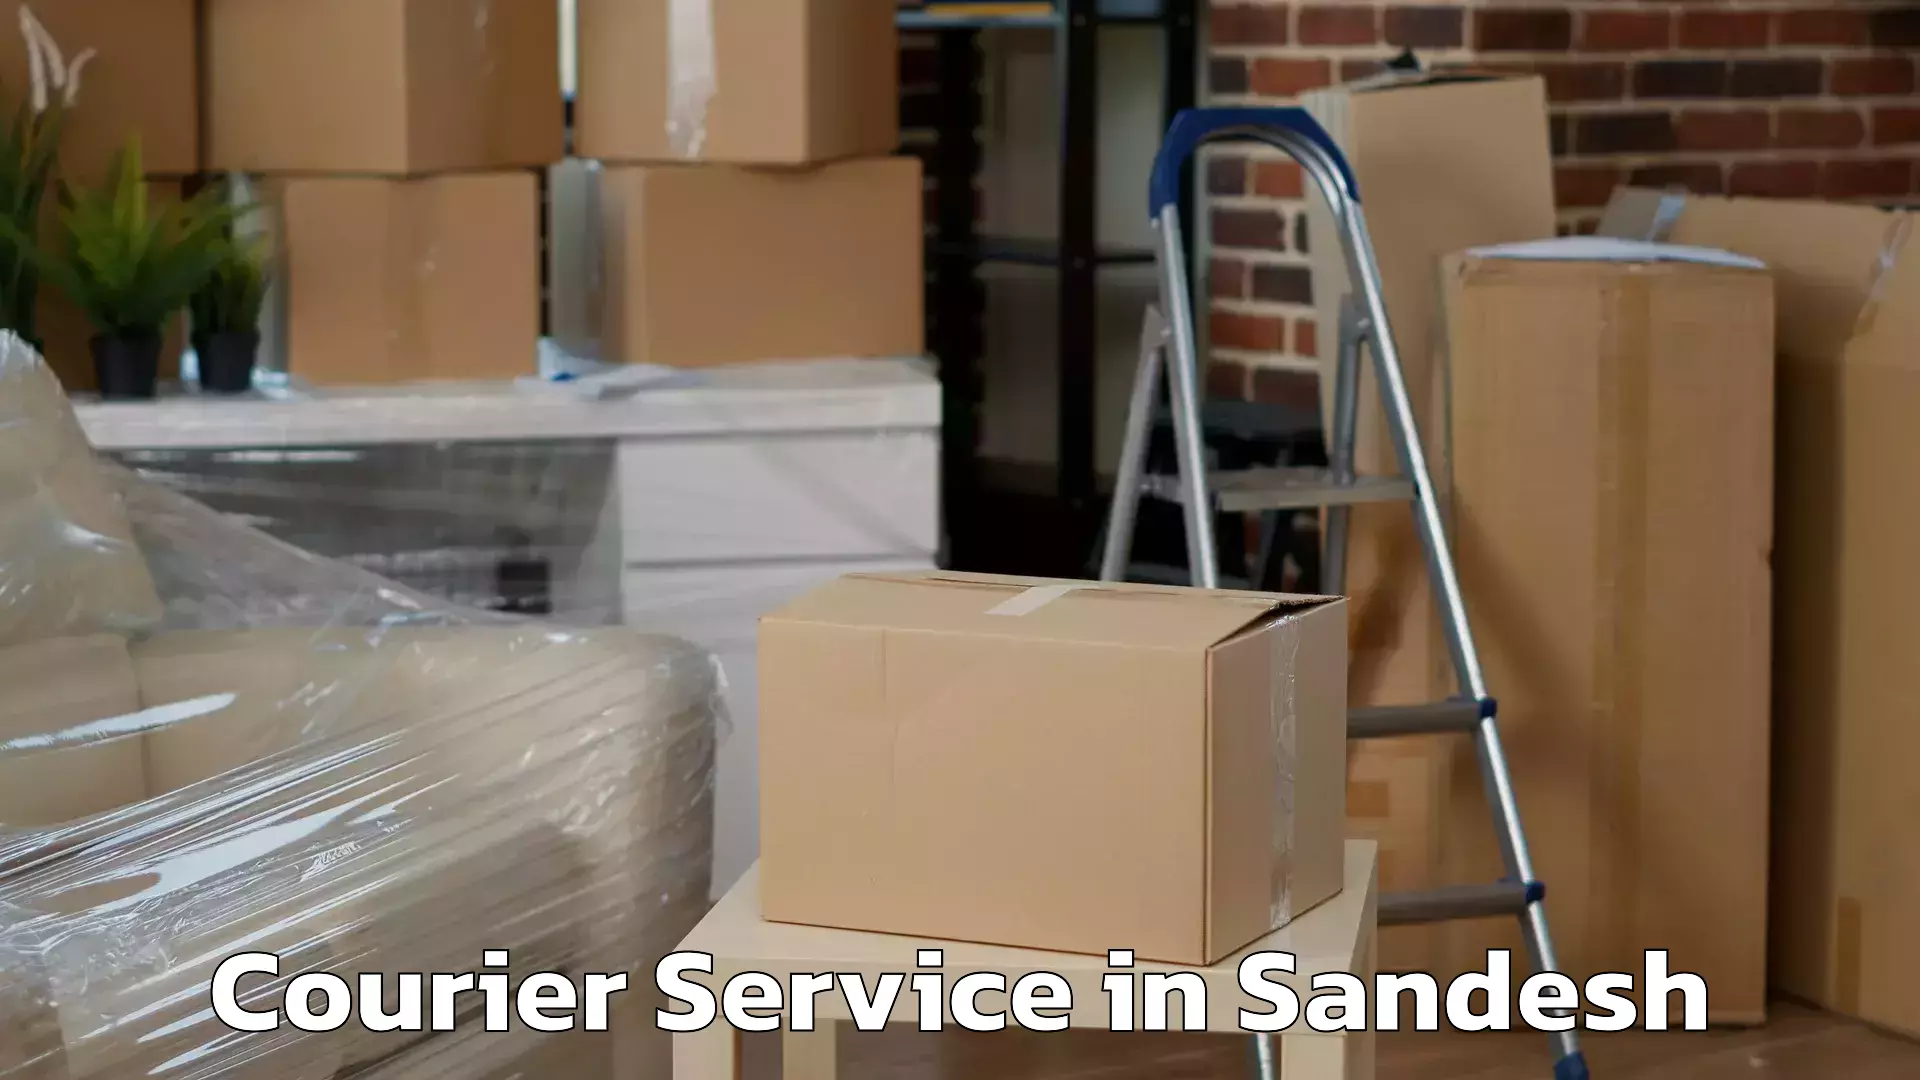 Professional courier services in Sandesh